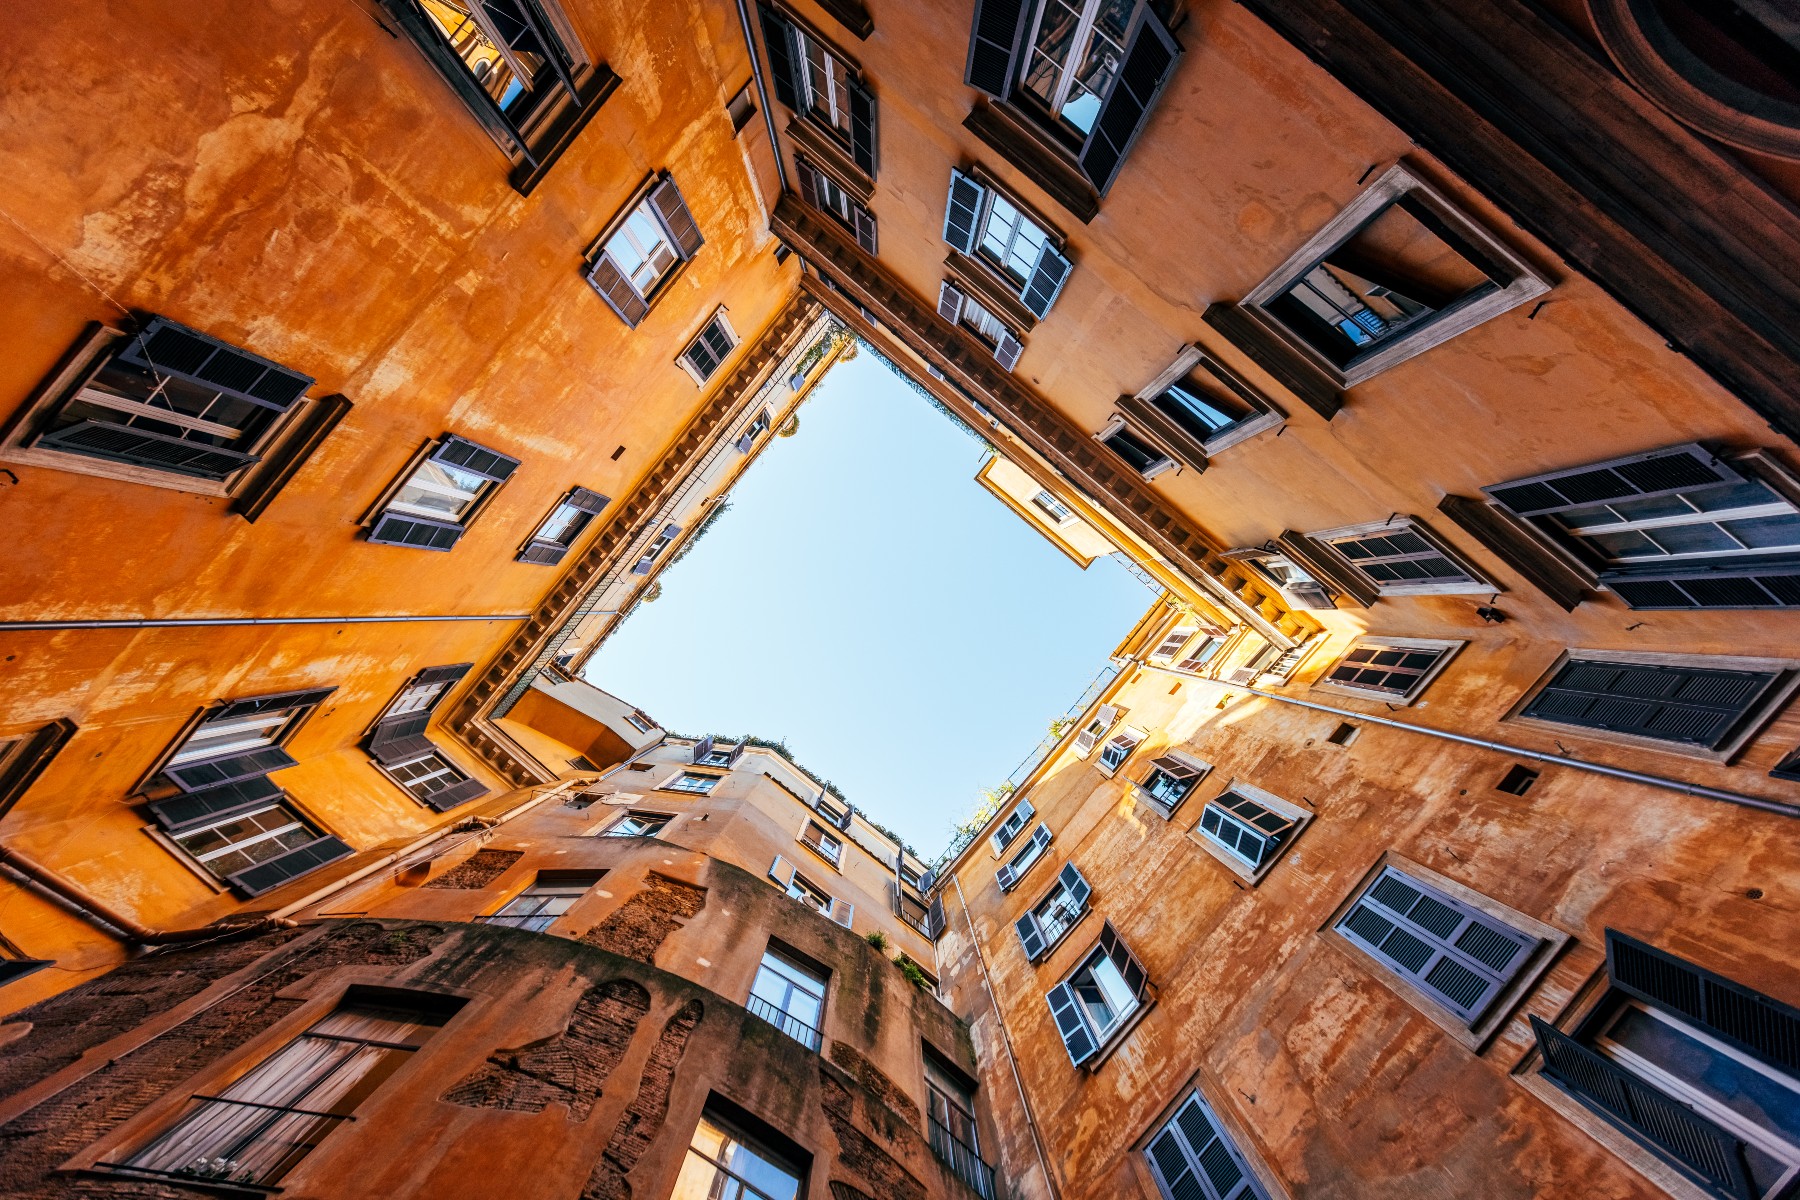 Low wide angle view of residential apartments house inner court yard in Rome, Italy.